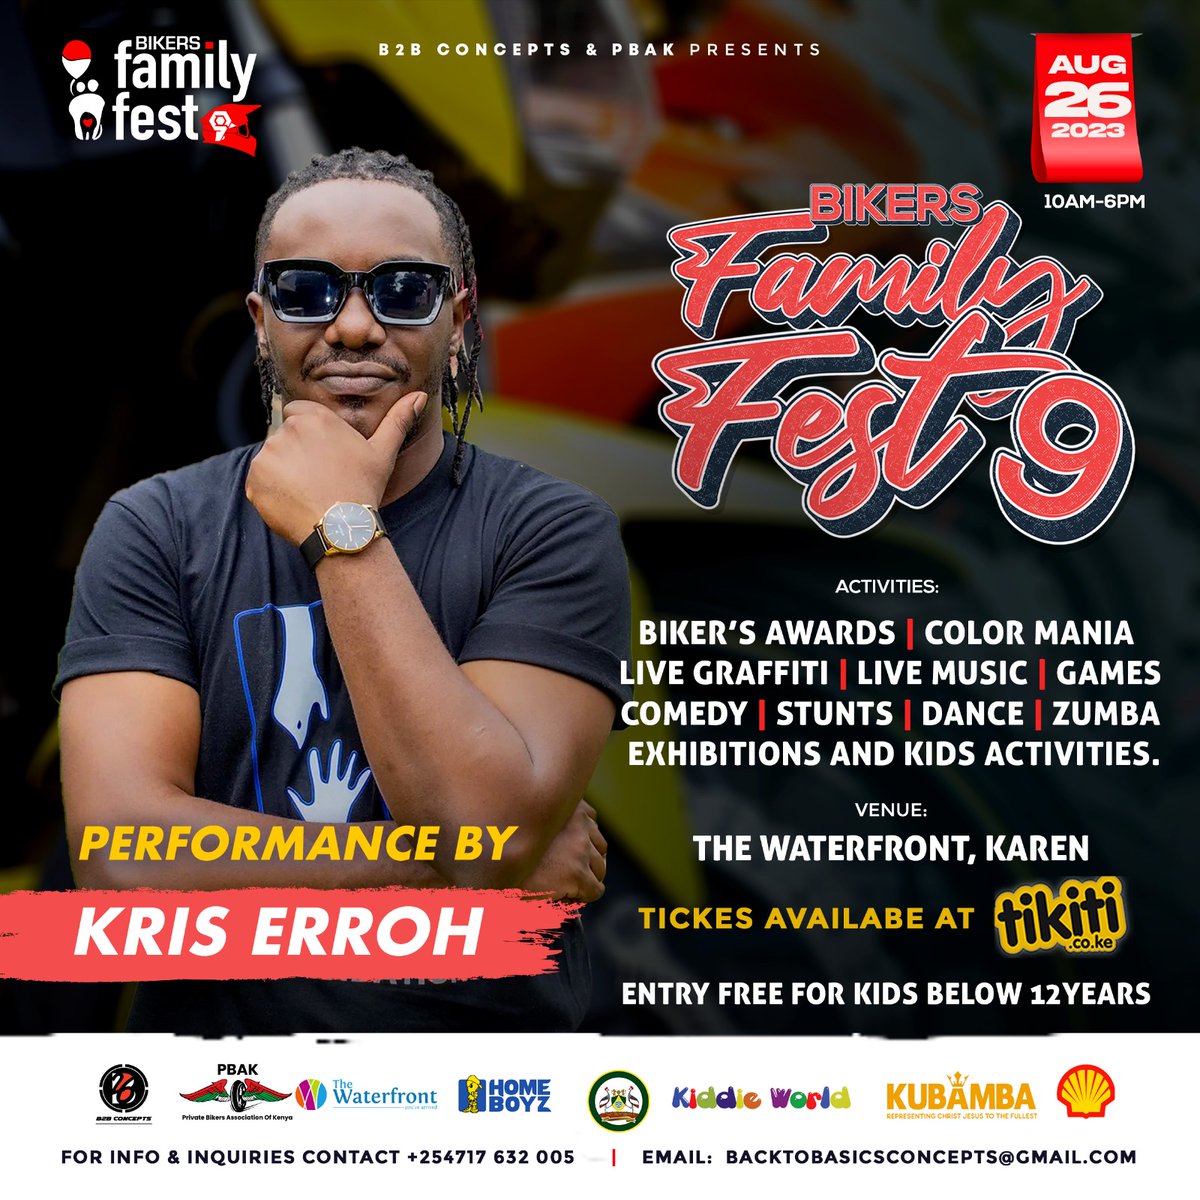 Headlining #FamilyFest this year. Get your tickets... And put on your dancing shoes. @Familyfest3 @bigmanupbeat #ErrohNation